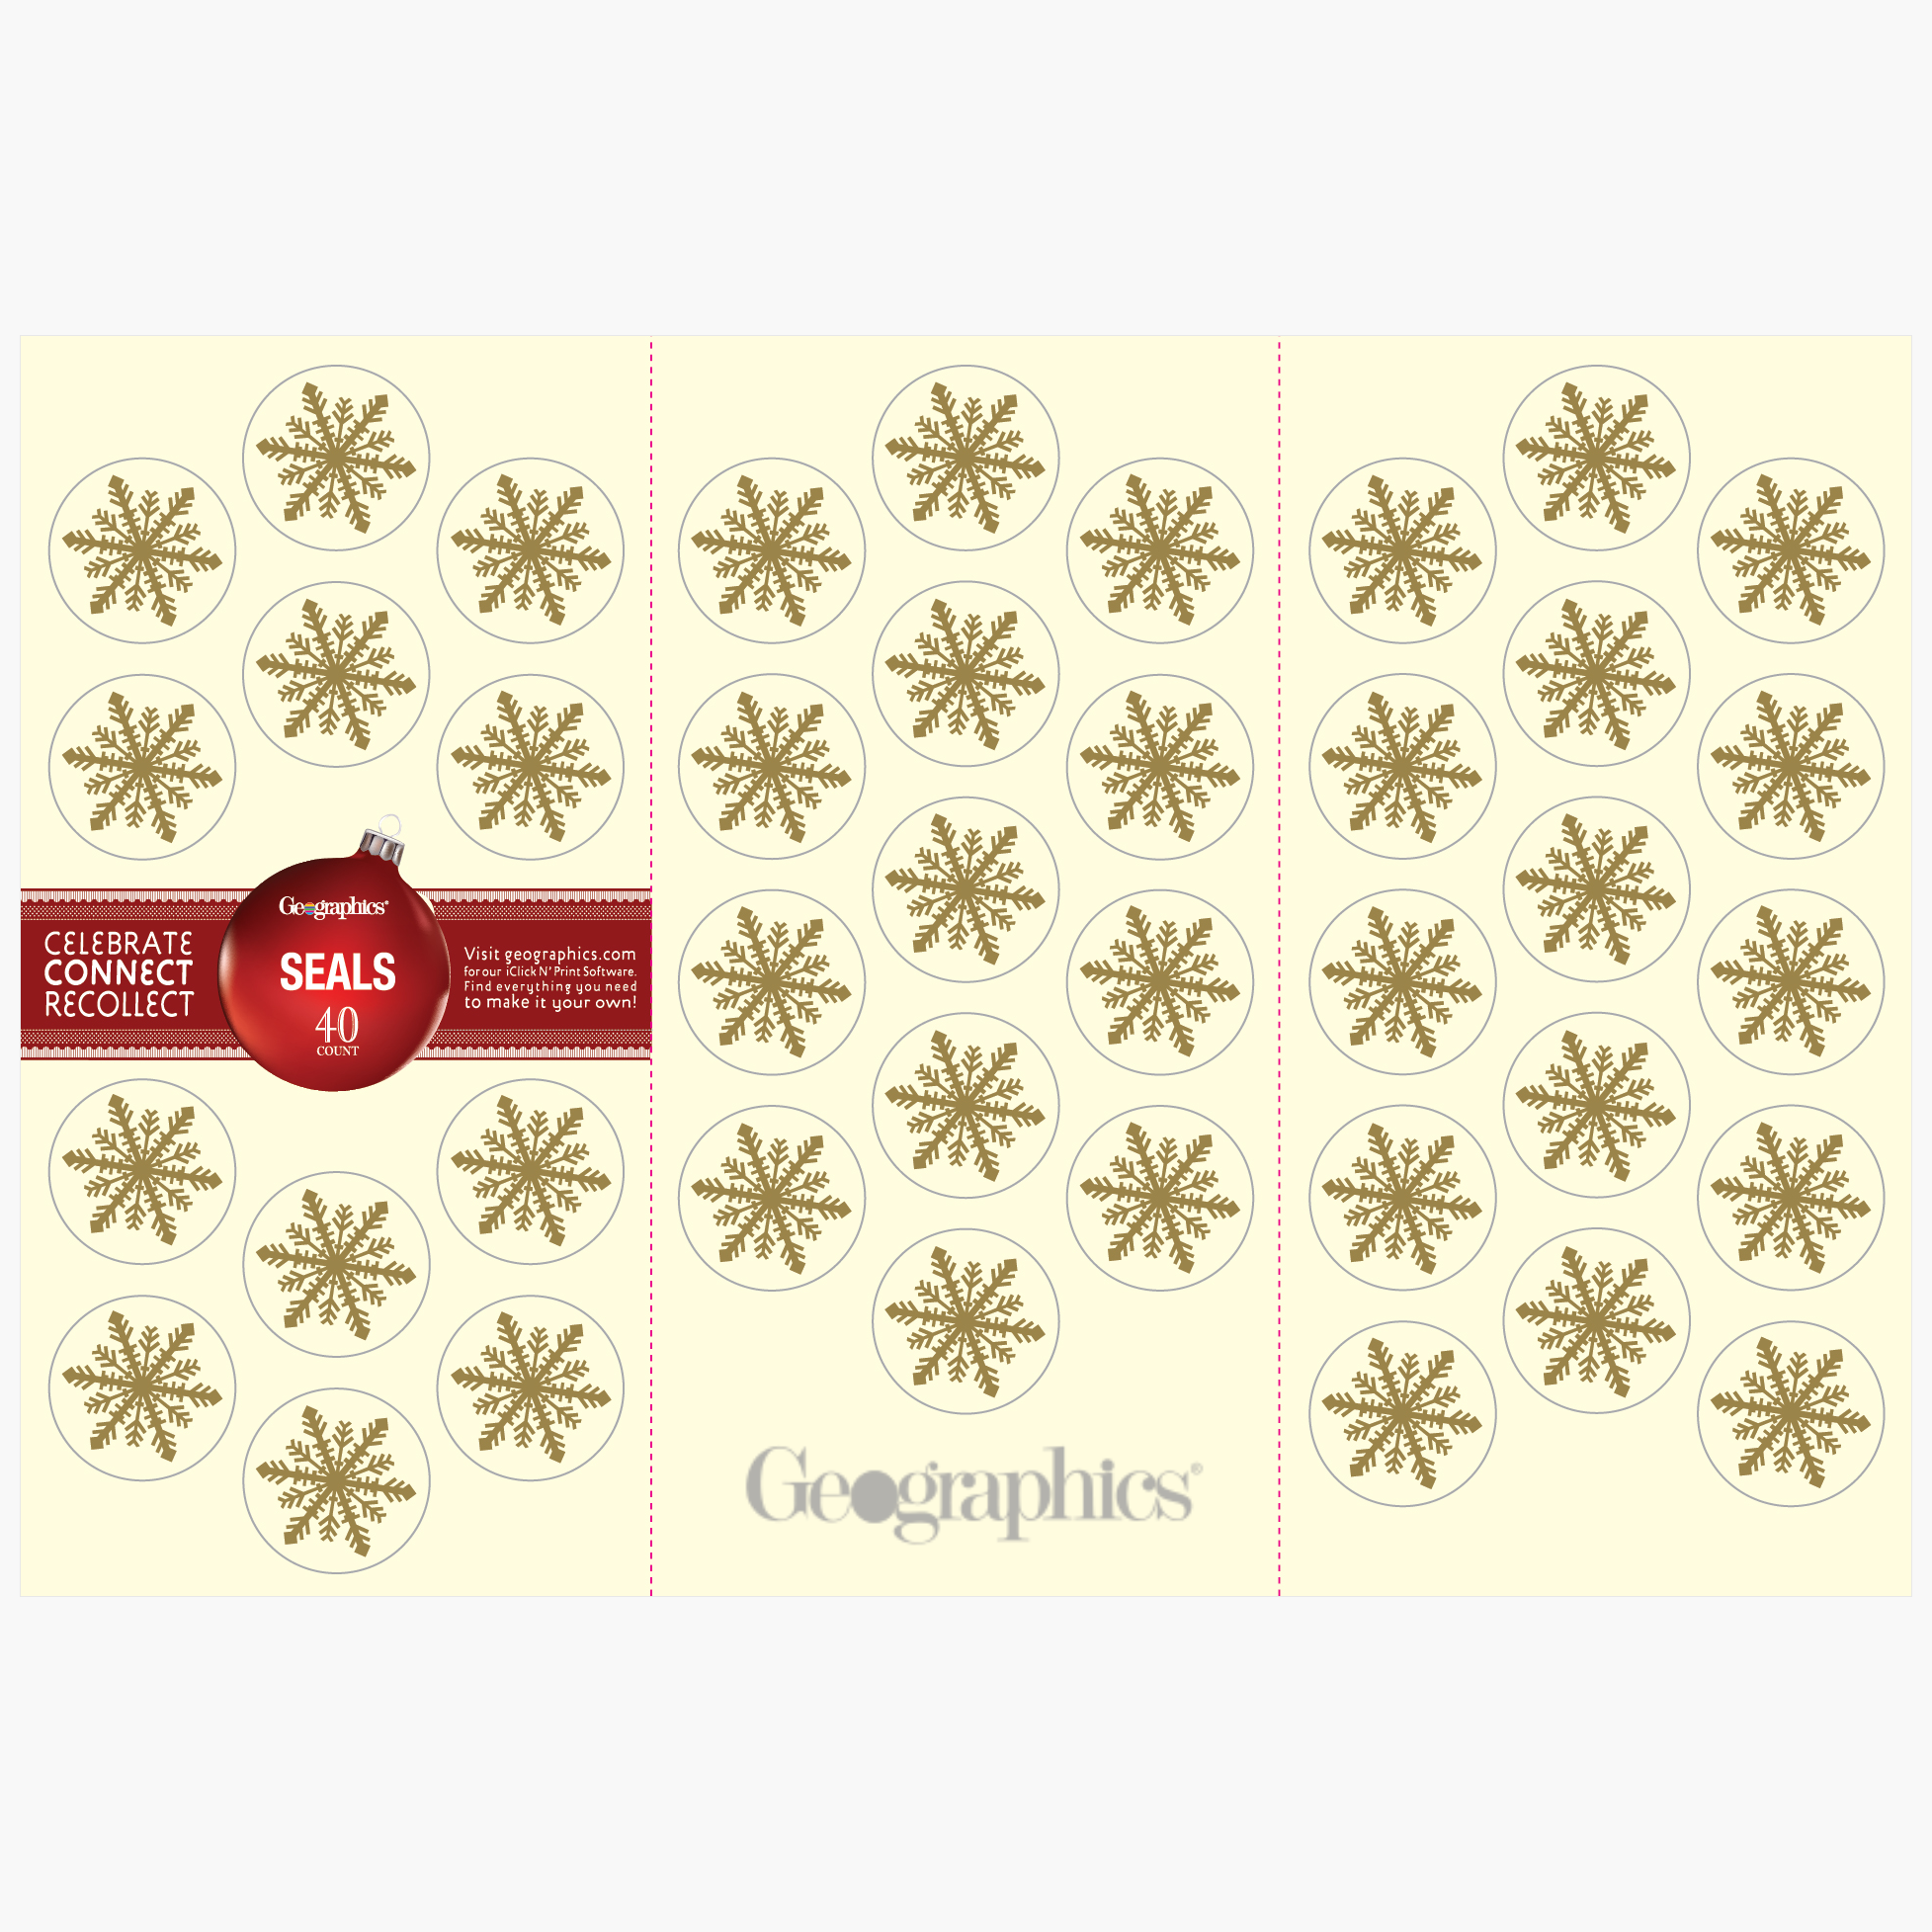 Frost-Ivory-Christmas-Seals-Gold-Silver-Foil-Geographics-1-48740W